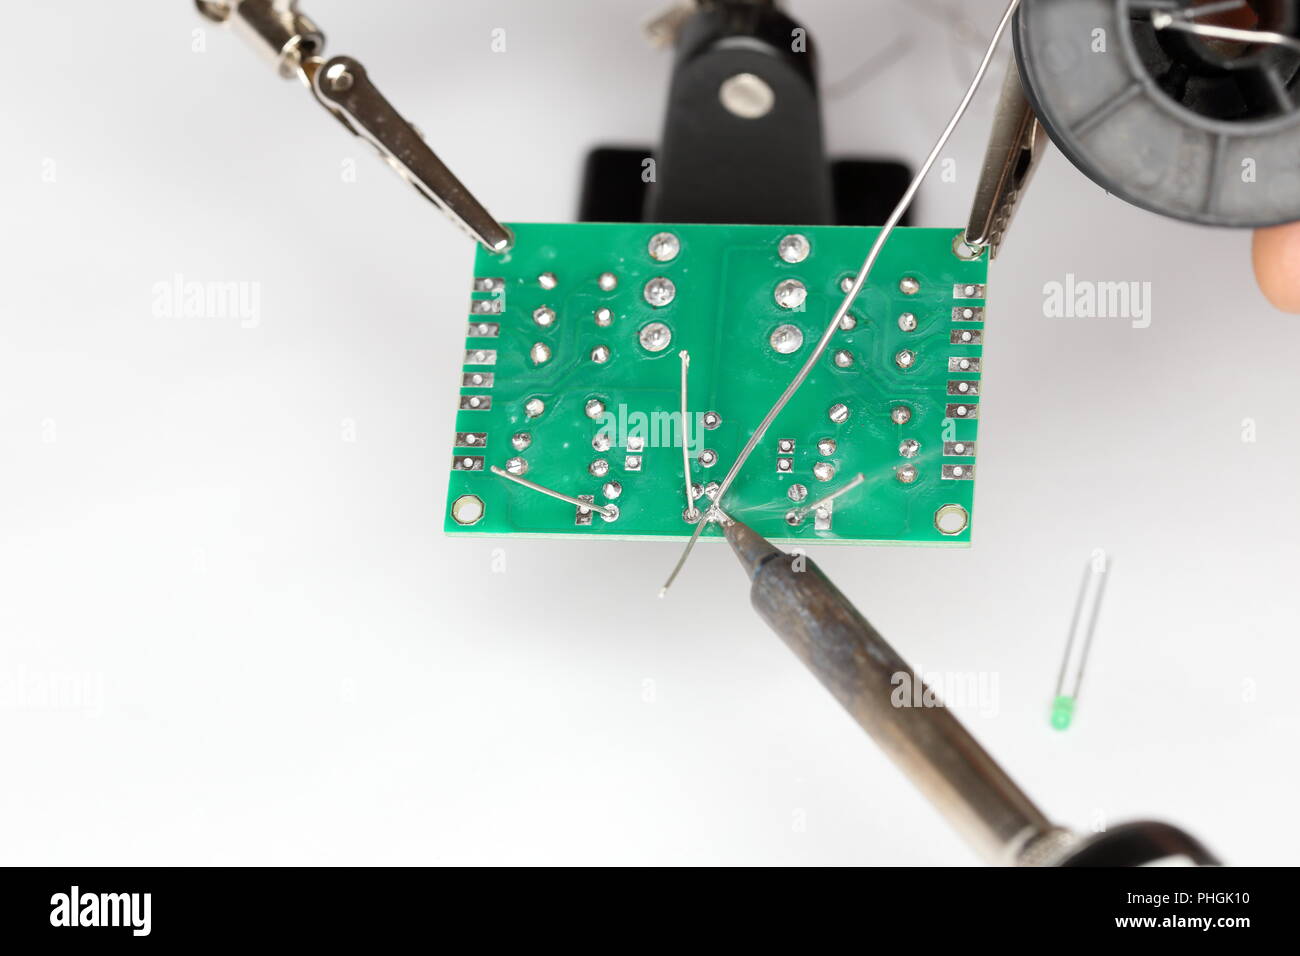 soldering a green card Stock Photo